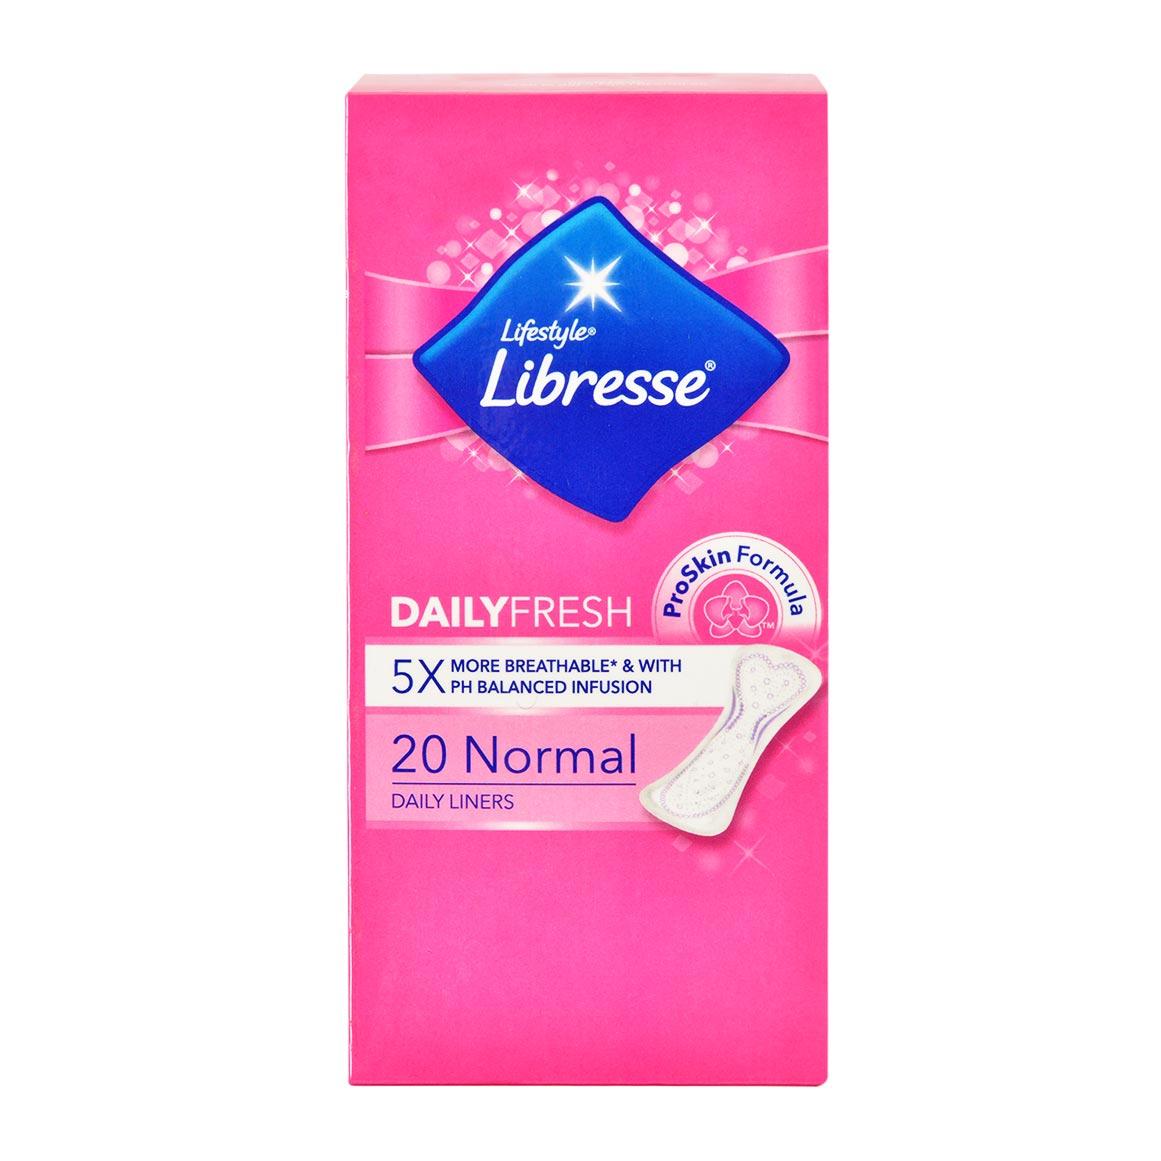 Libresse Extra Protection Extra Long panty liners 20 pieces